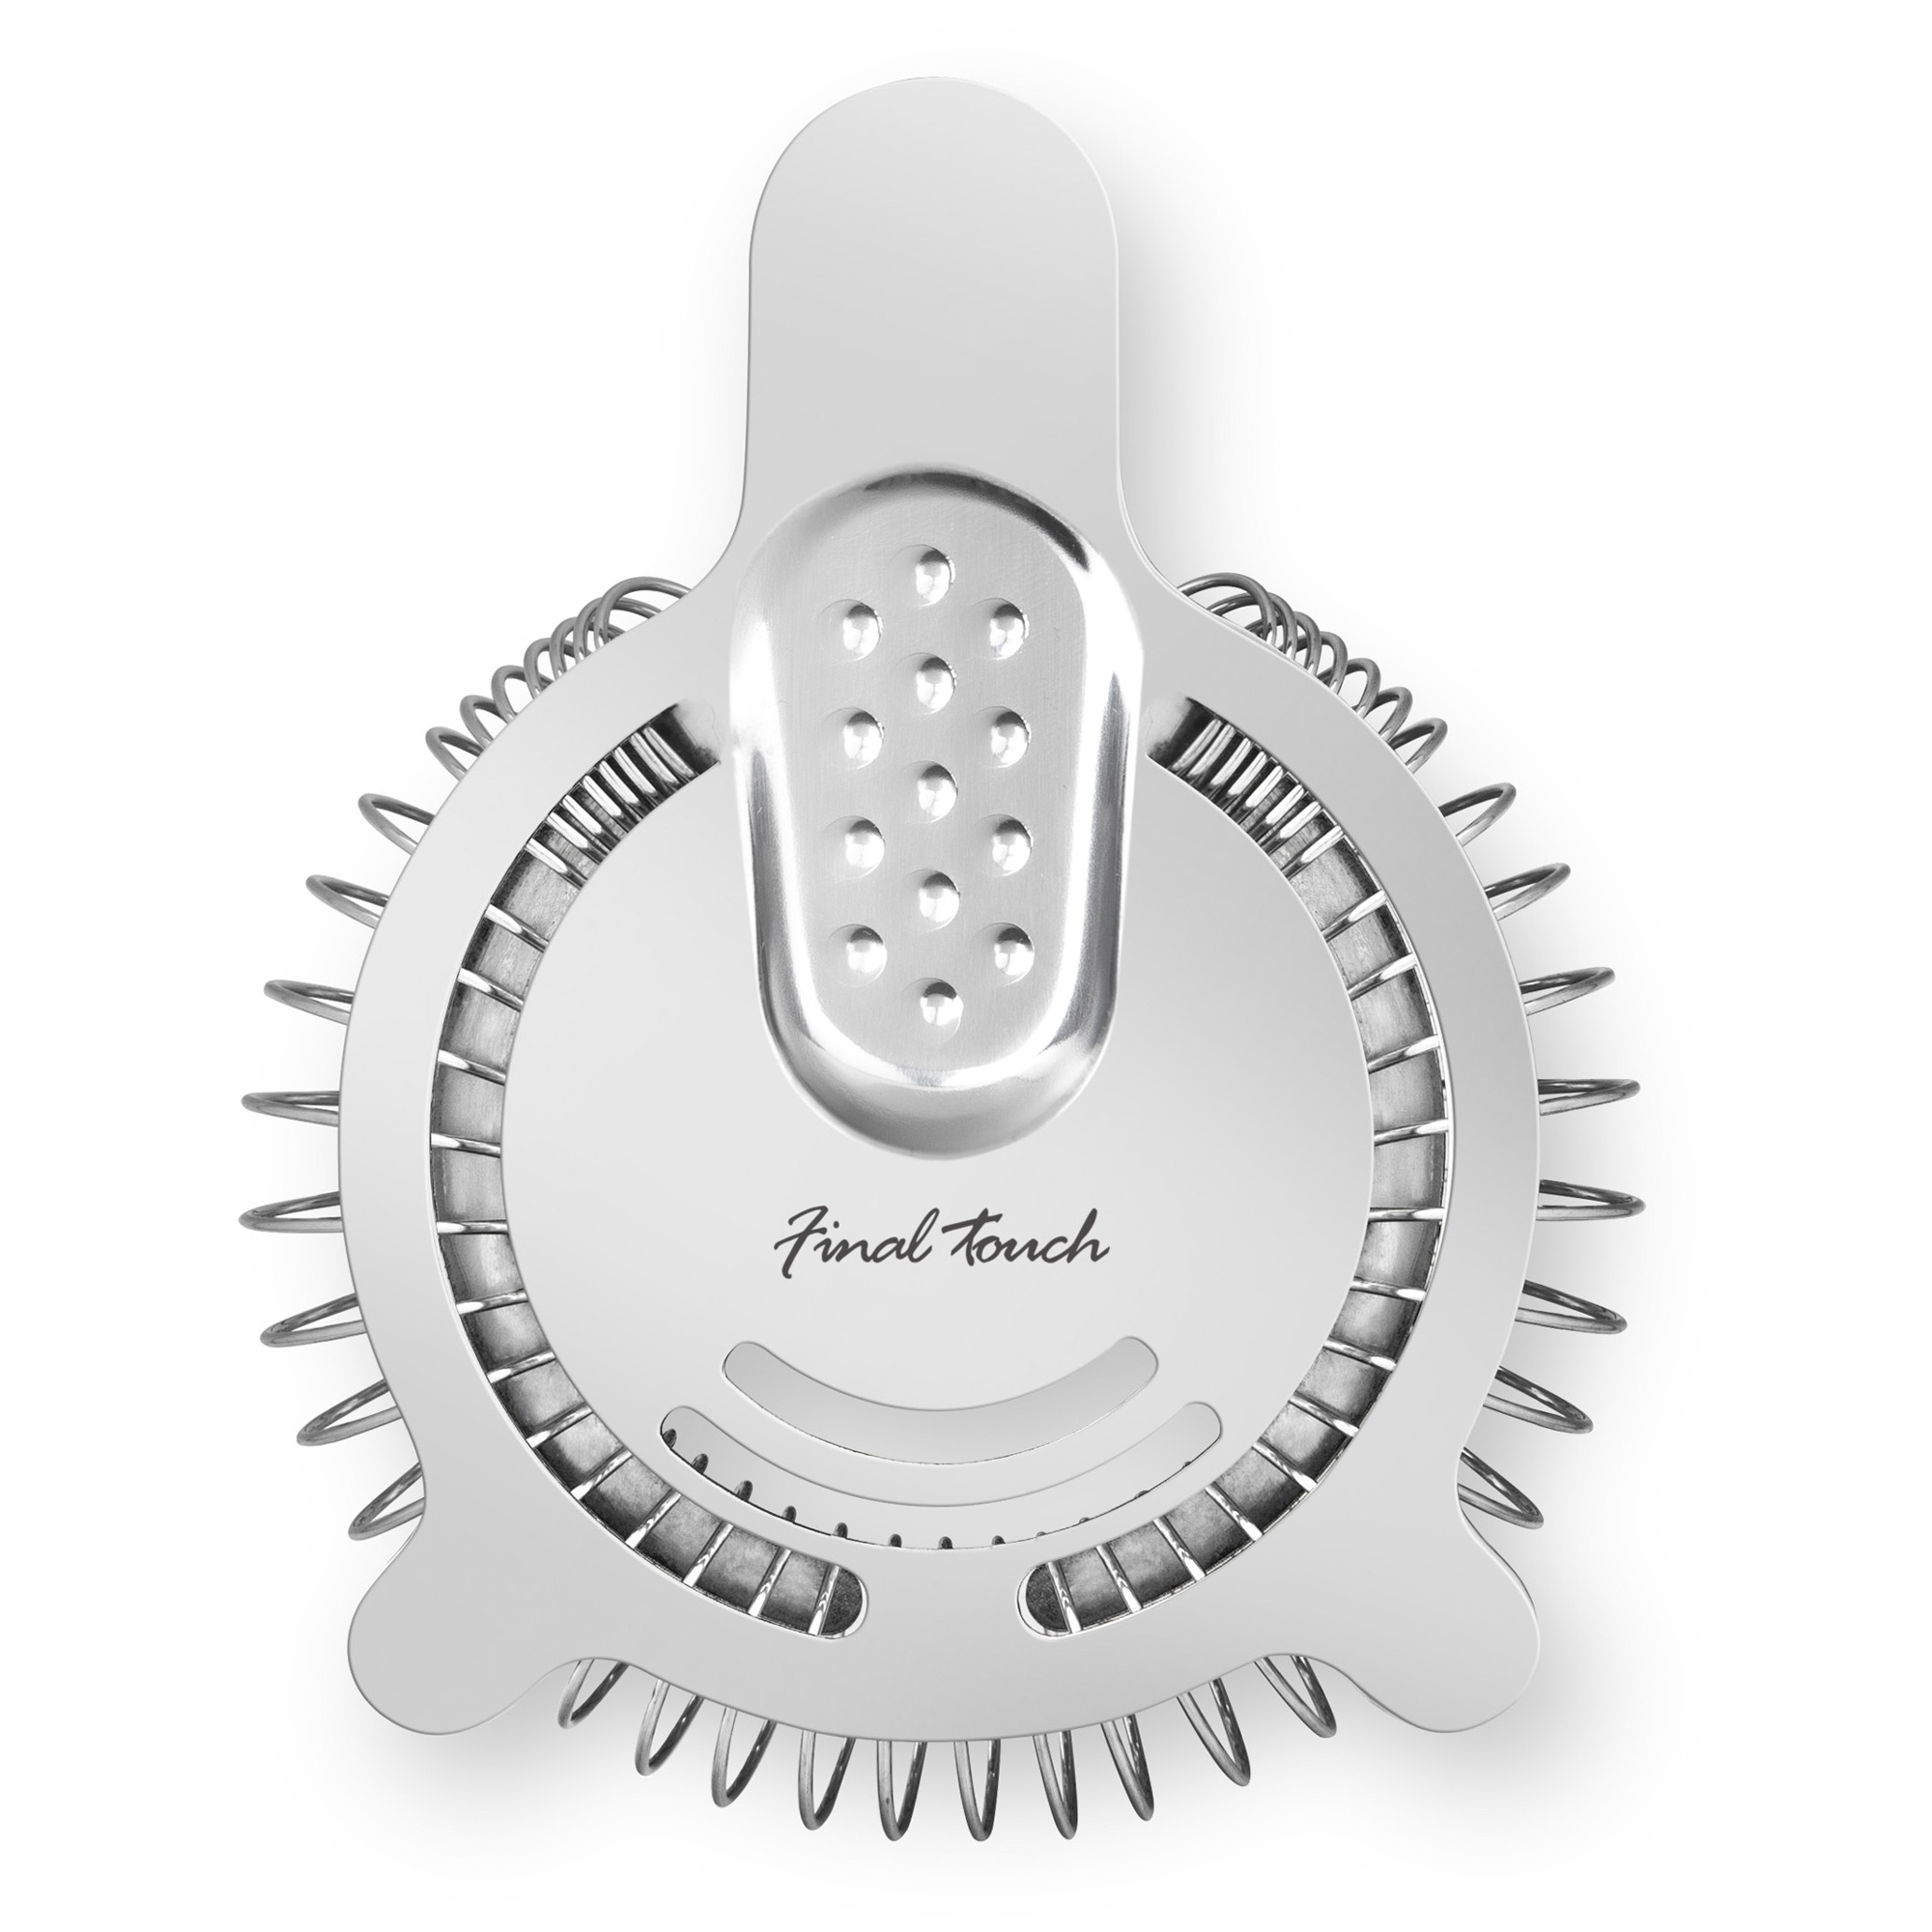 Final Touch Aperitif Cocktail Mixing Spoon (Stainless Steel)